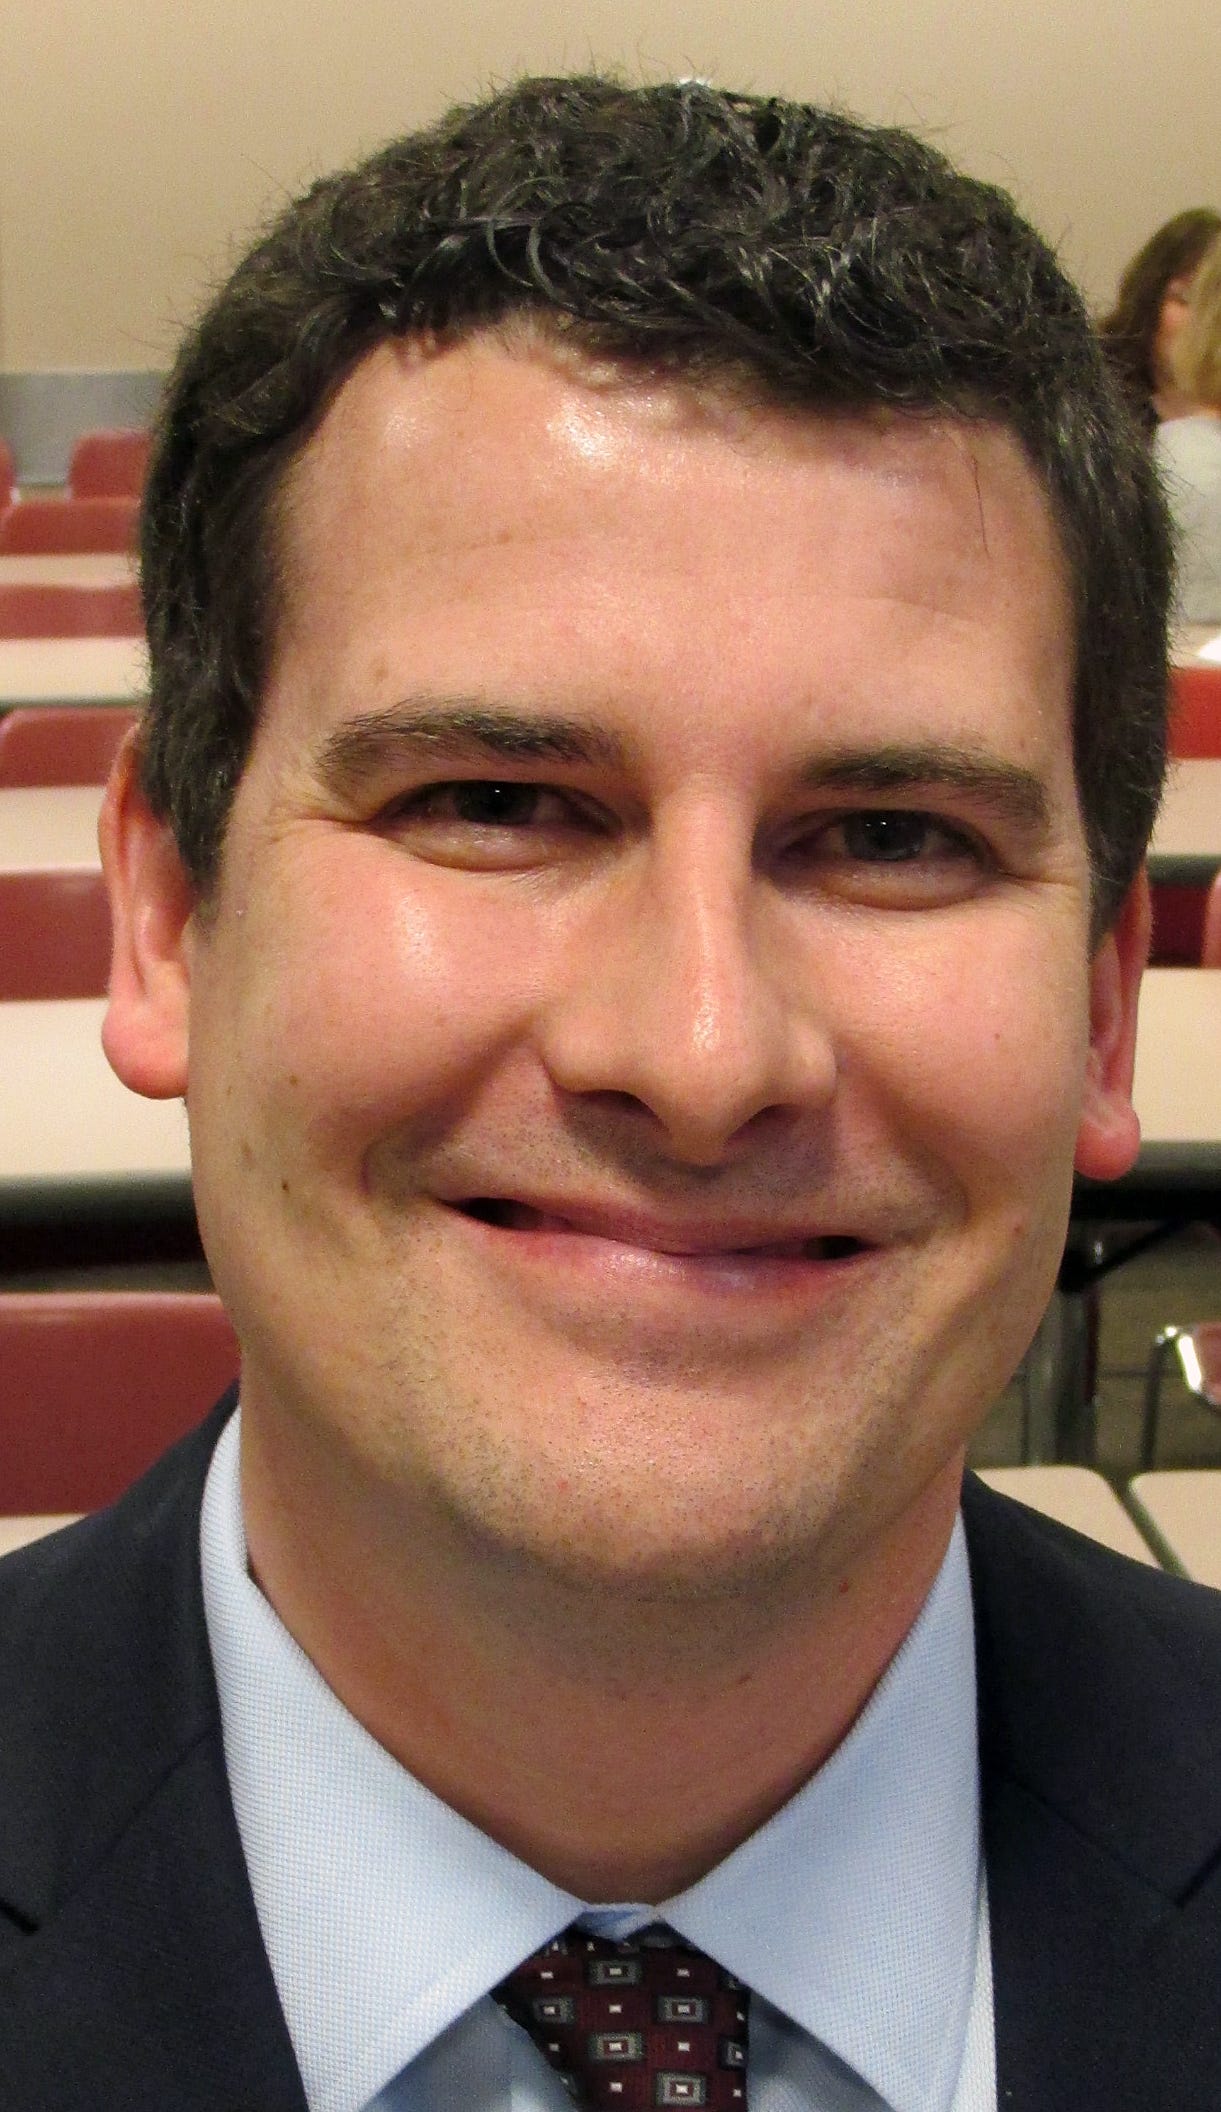 Joseph Penney to succeed Tom Weiser as Fairfield Schools business manager